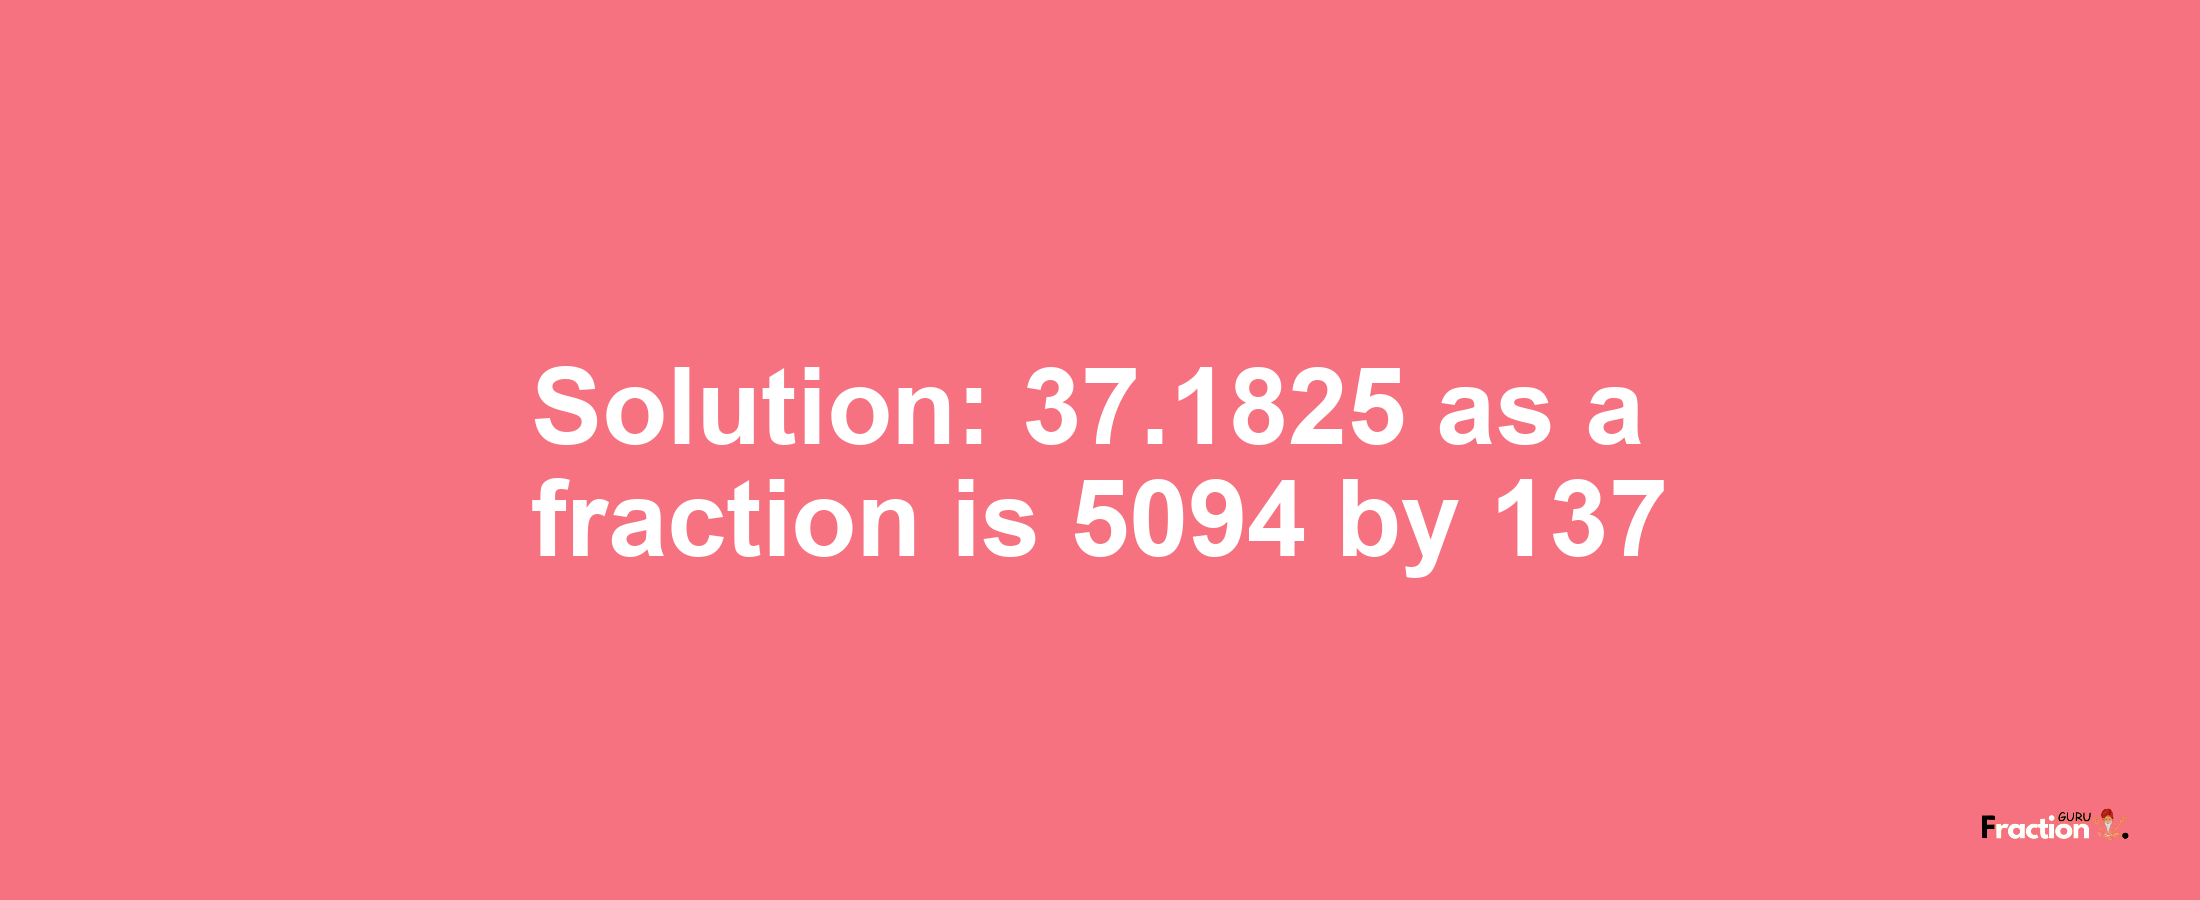 Solution:37.1825 as a fraction is 5094/137